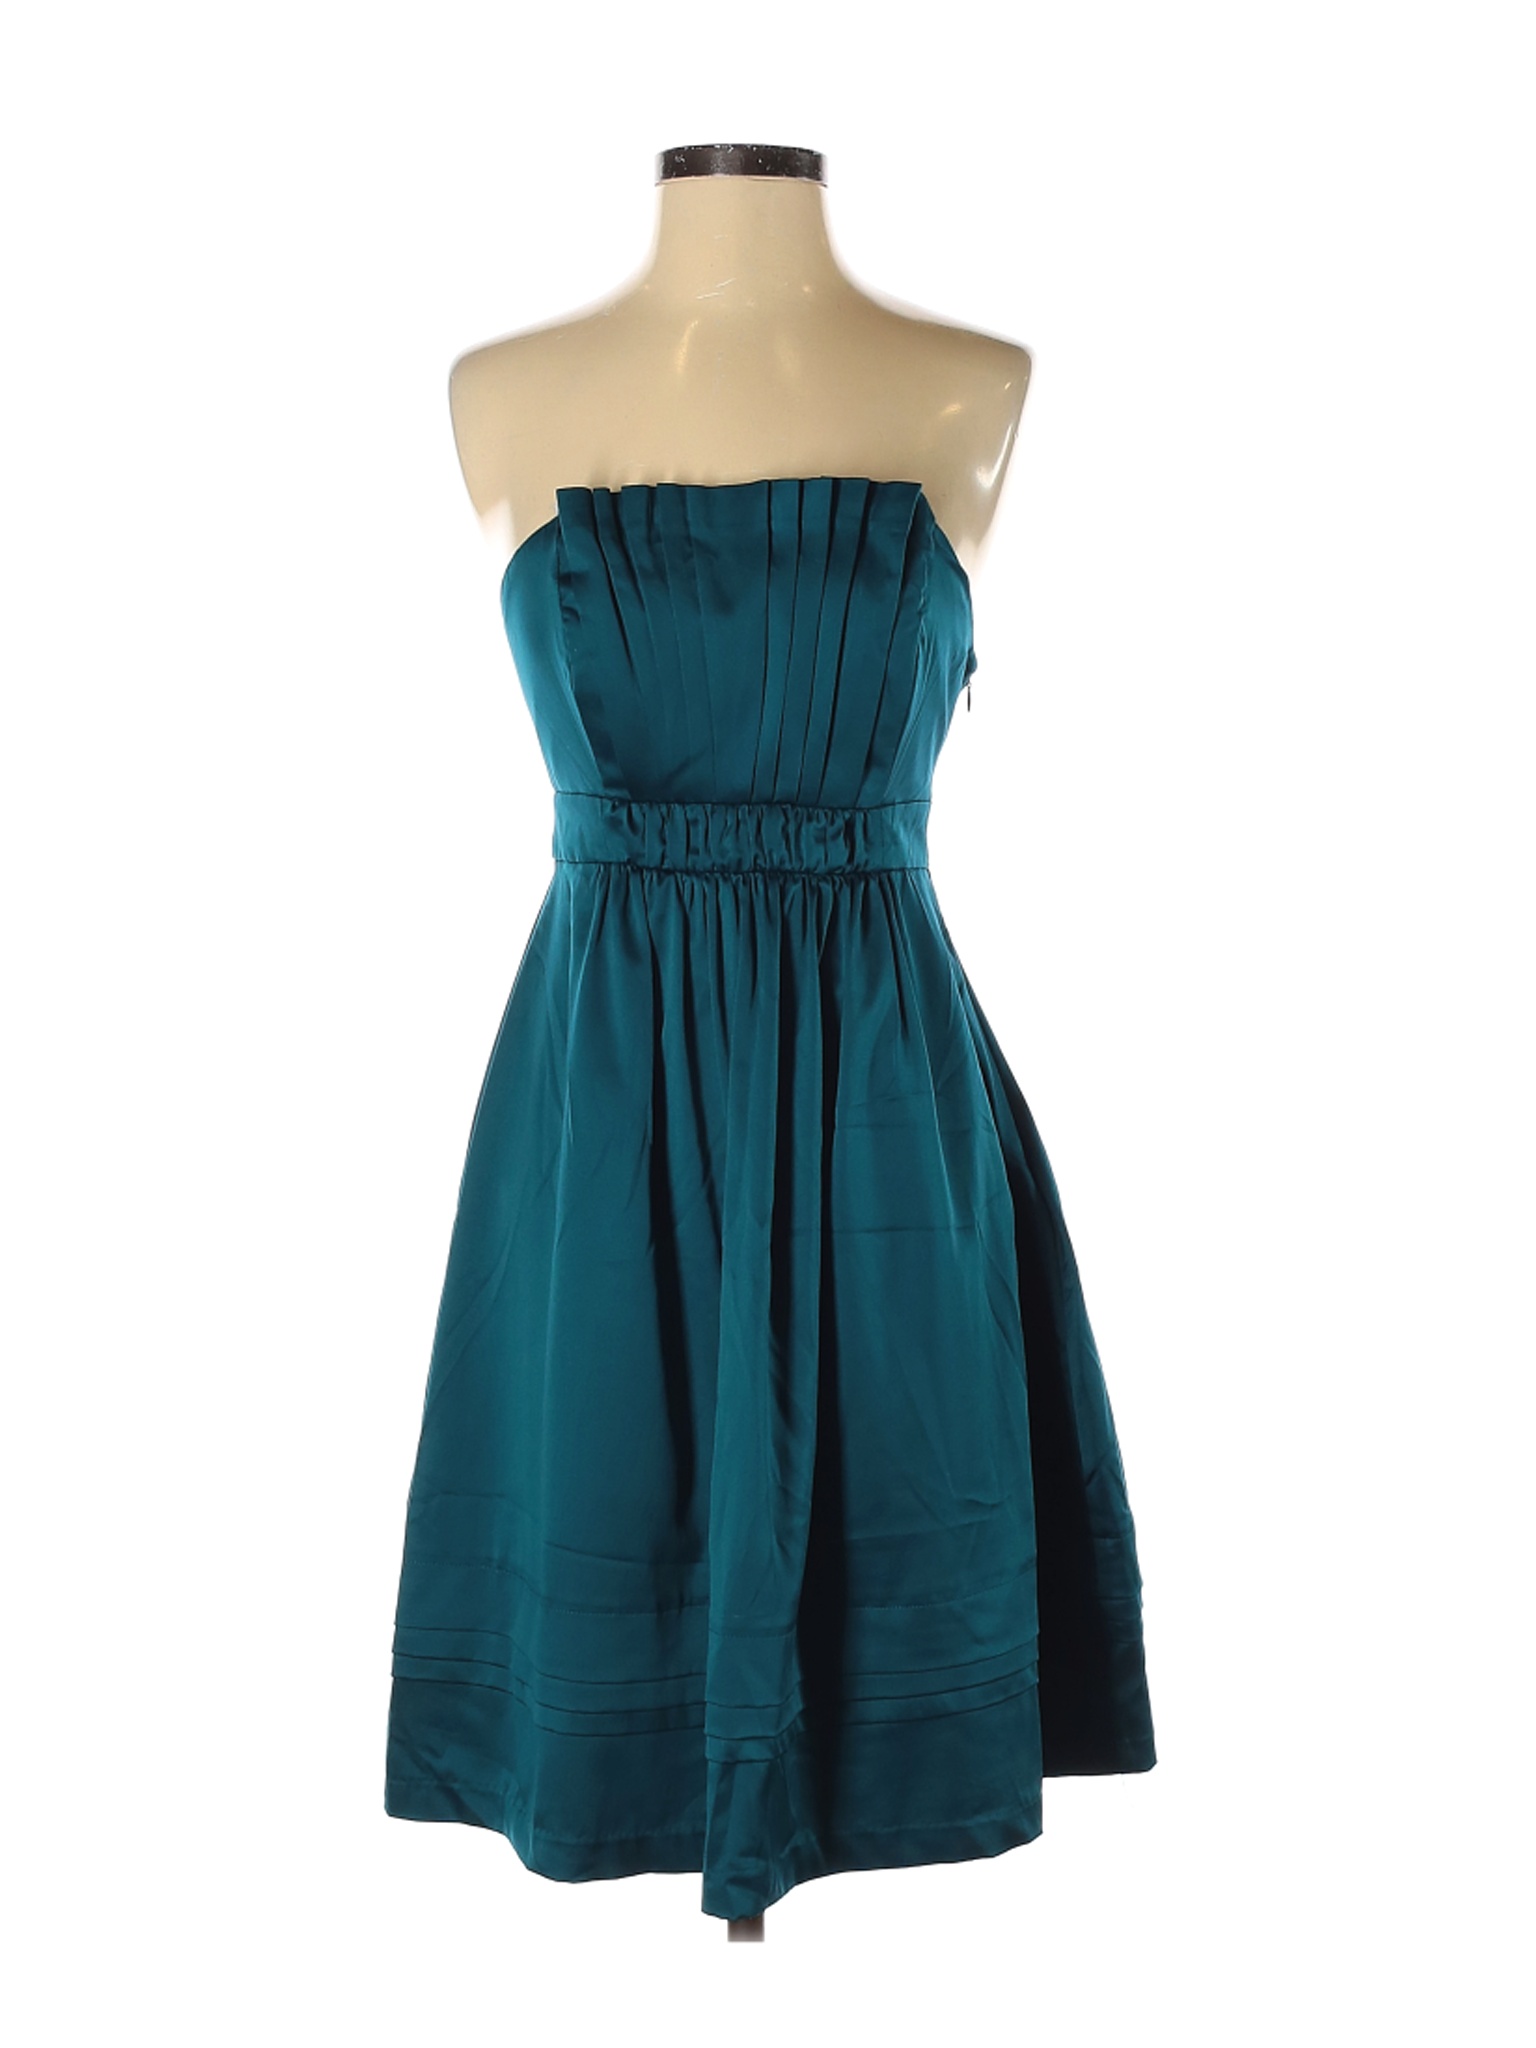 The Limited Women Green Cocktail Dress 0 | eBay